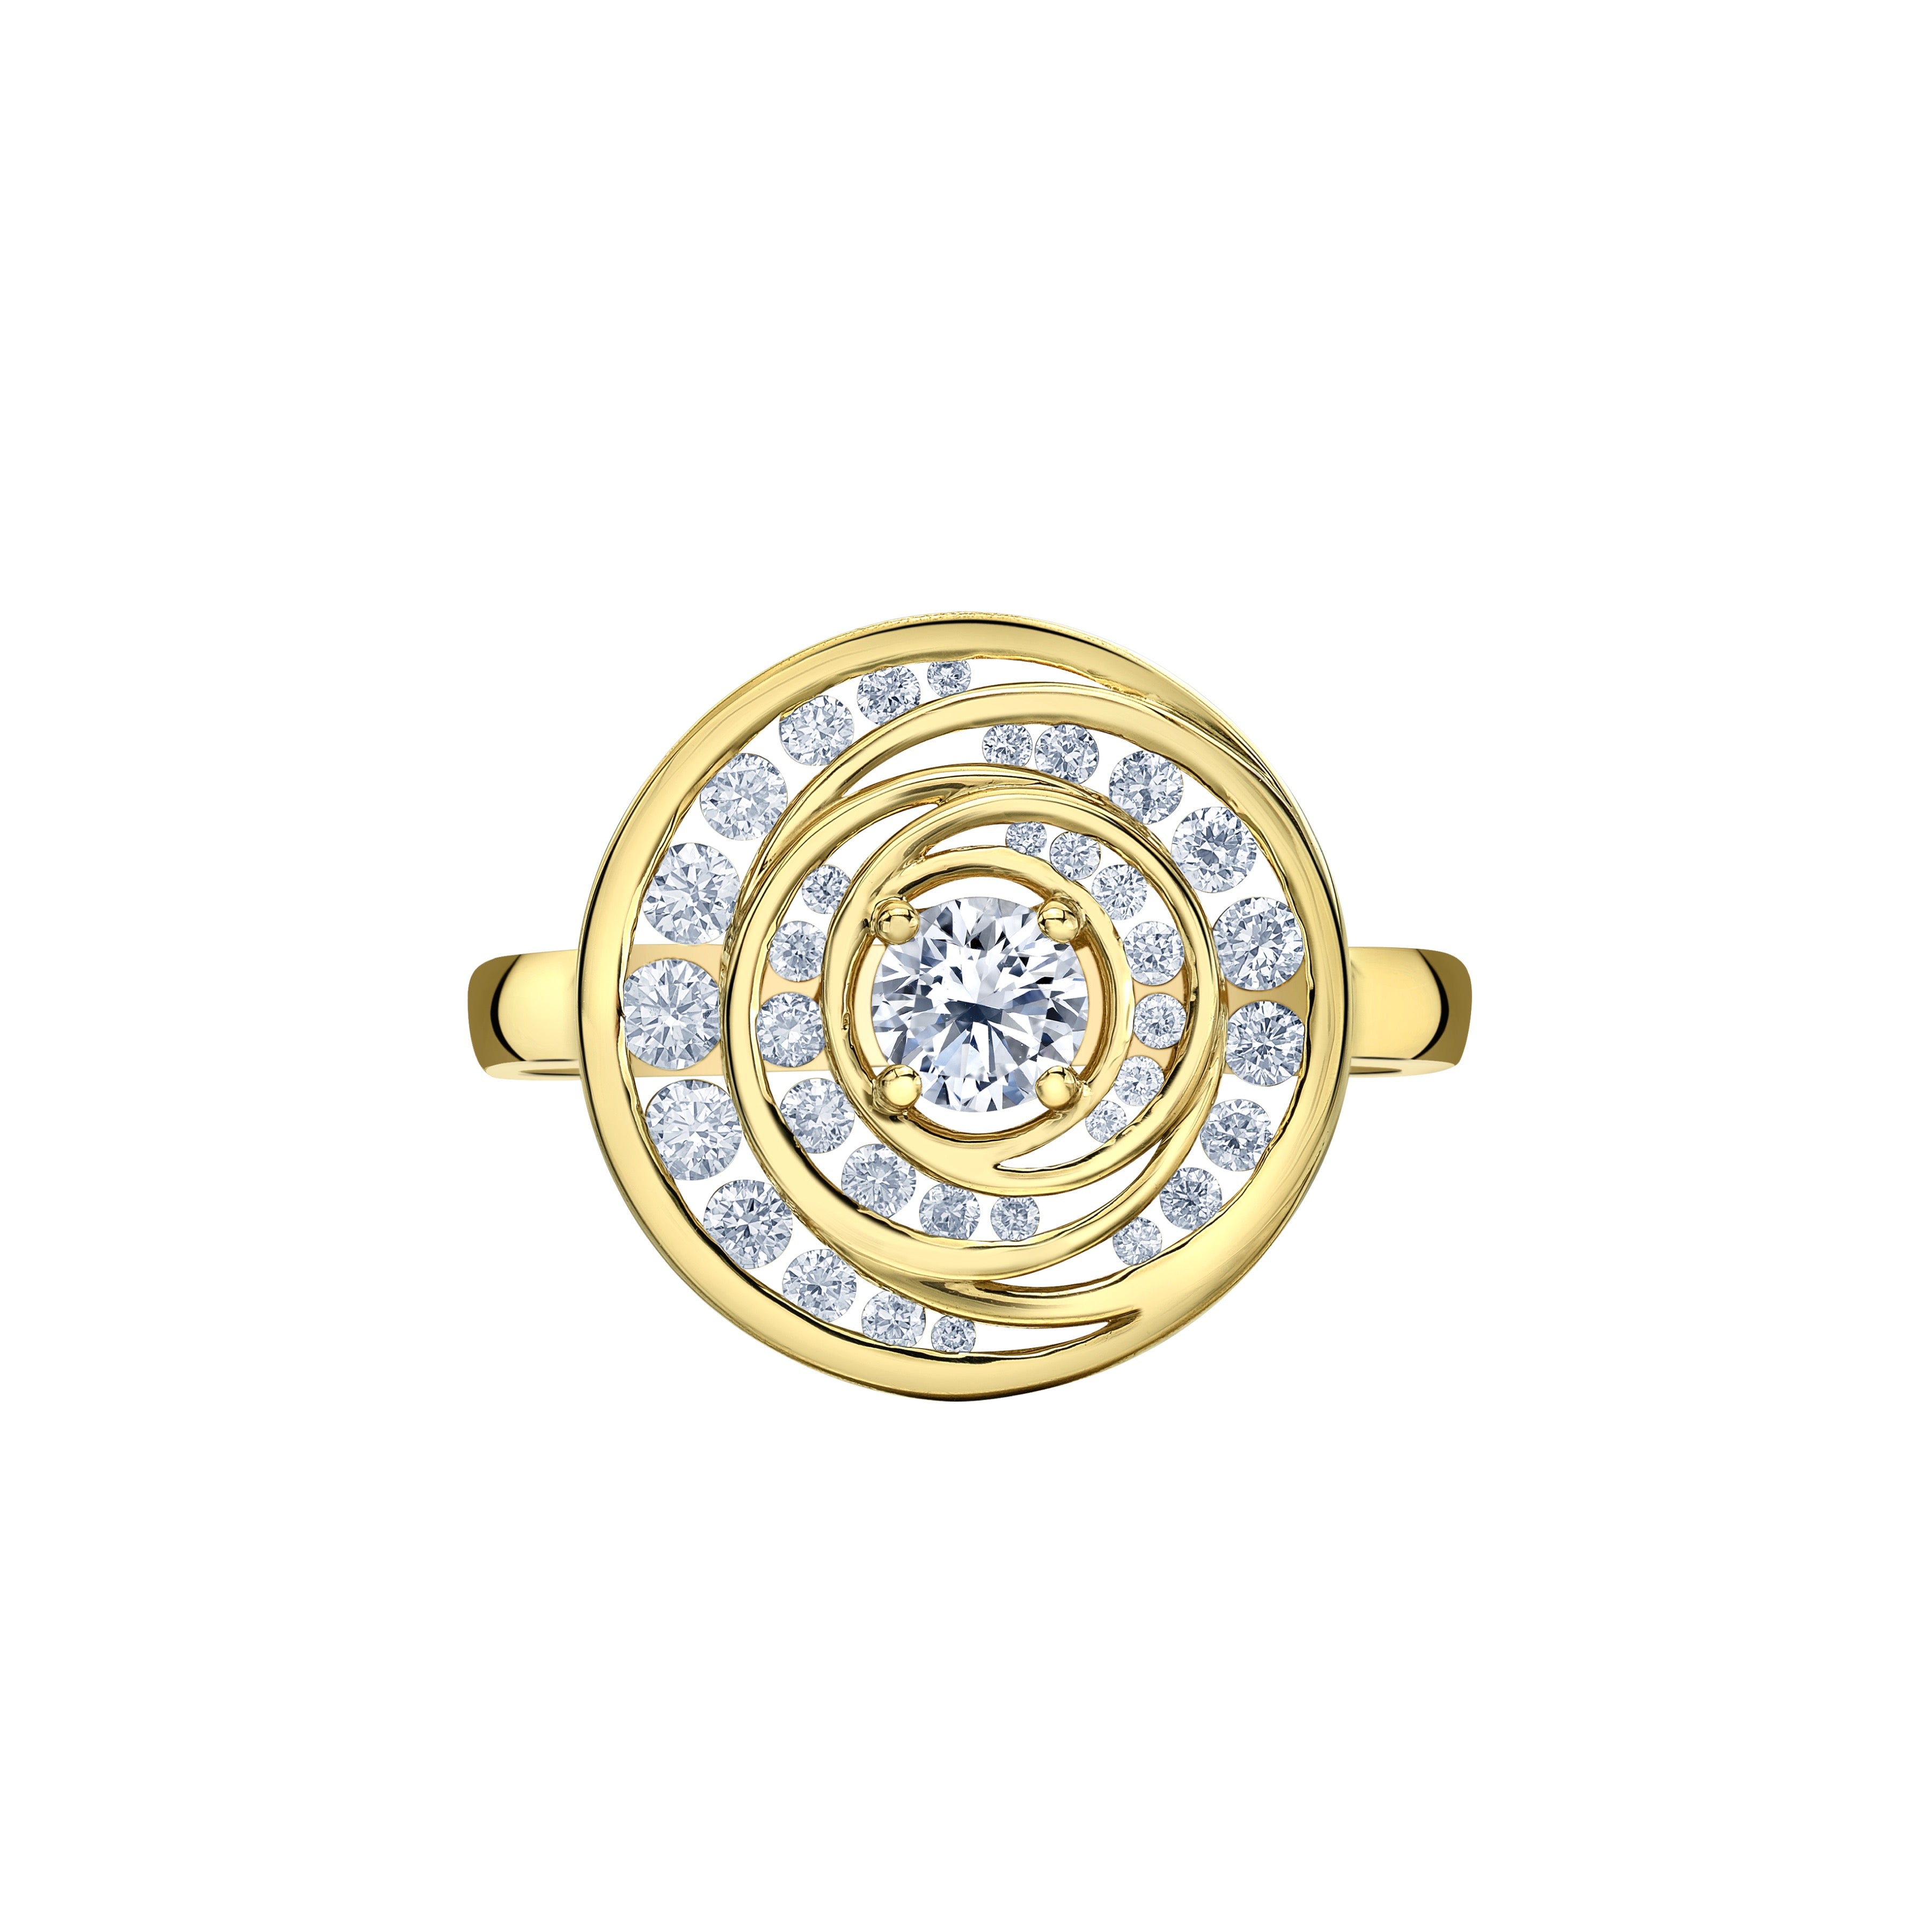 Crafted in 14KT yellow Certified Canadian Gold, this ring features a full moon set with round brilliant-cut Canadian diamonds.